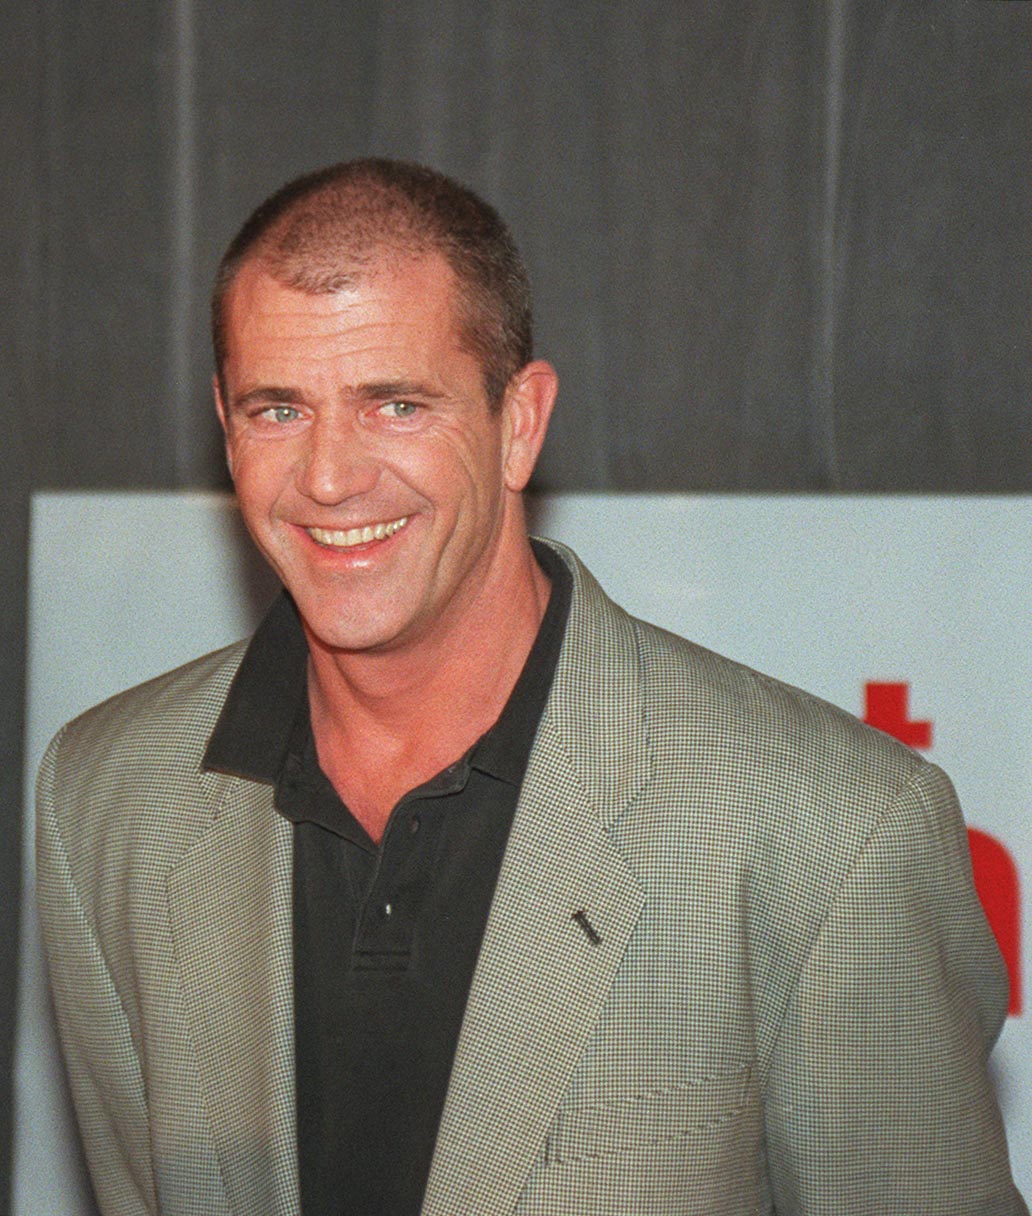 Mel Gibson at a press conference for "What Women Want" on October 17, 2000, in Sydney, Australia. | Source: Getty Images